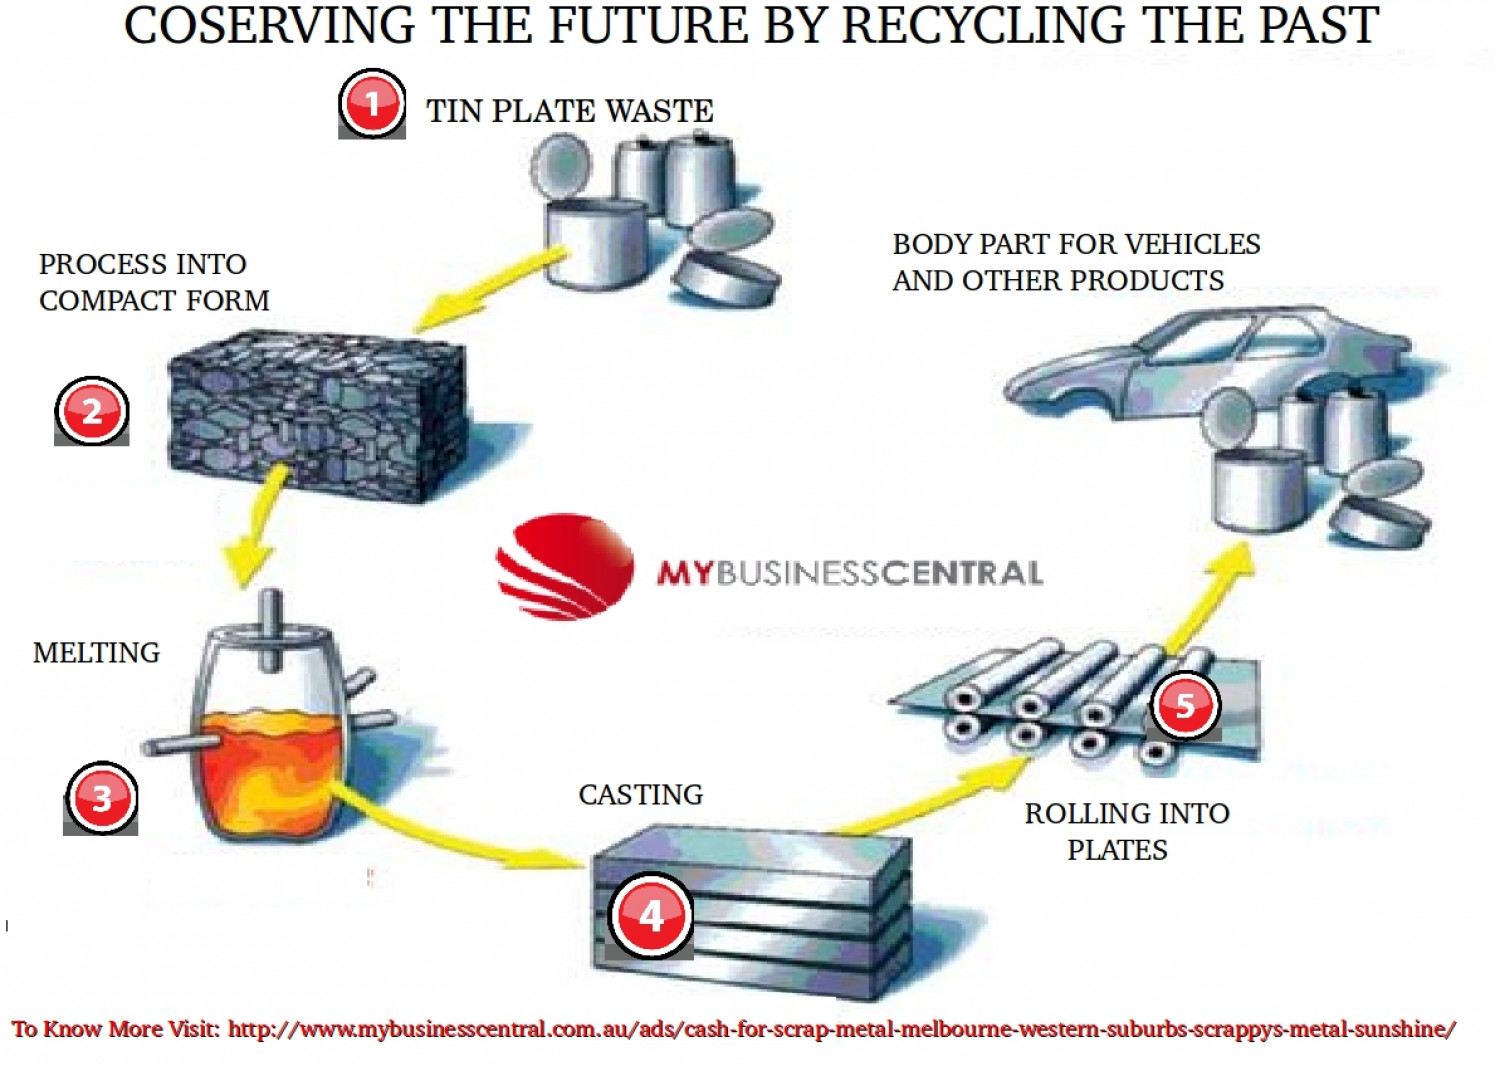 Conserving The Future By Recycling The Past Infographic